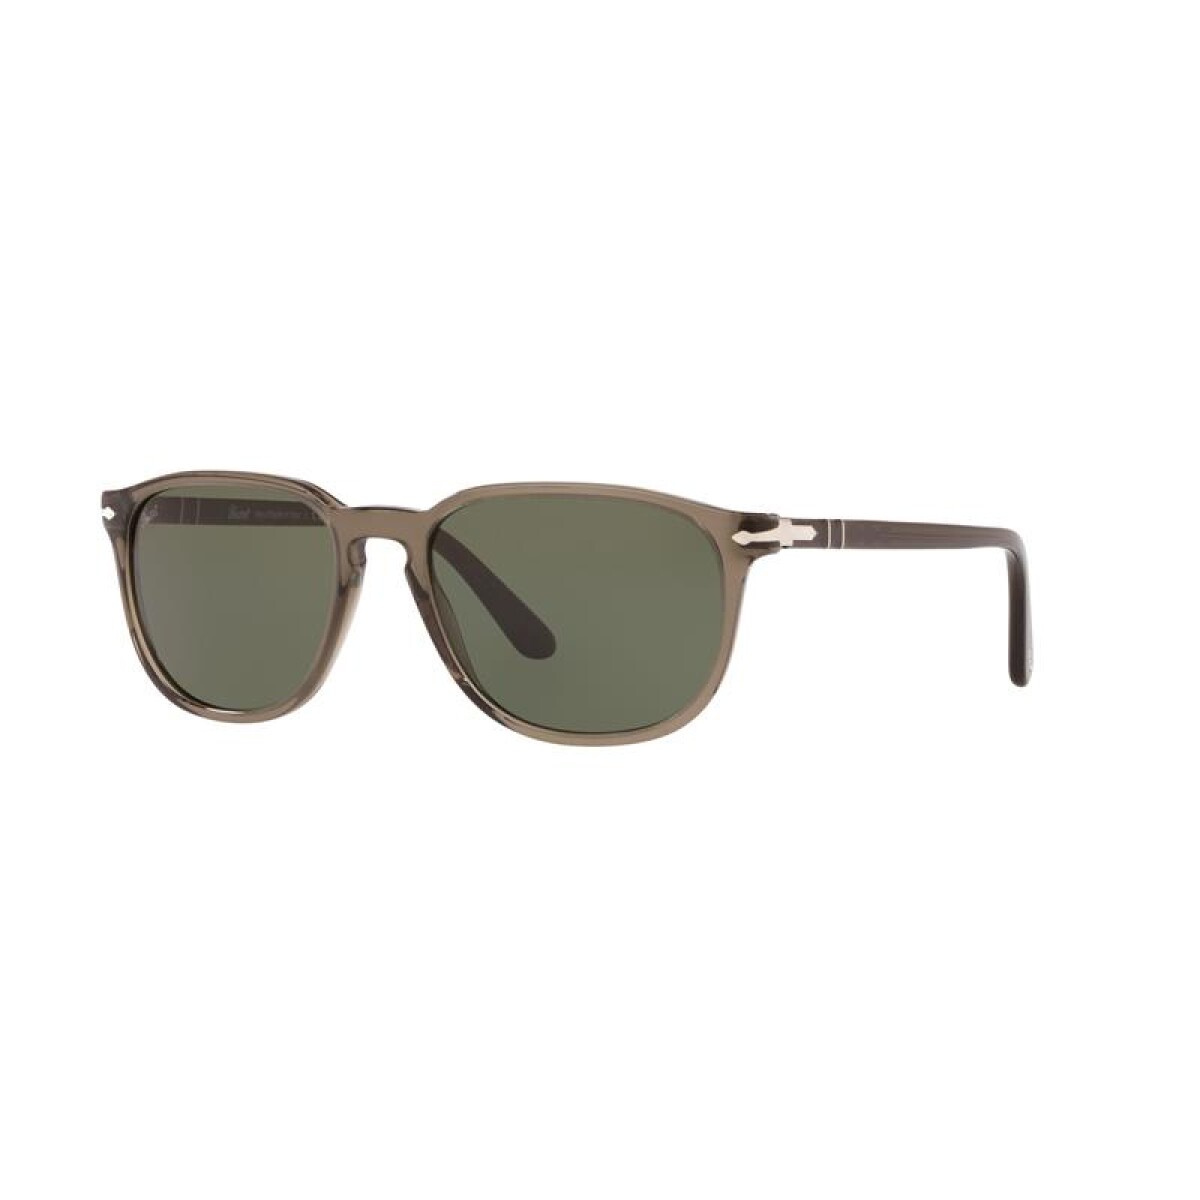 Persol 3019-s - 1103/31 